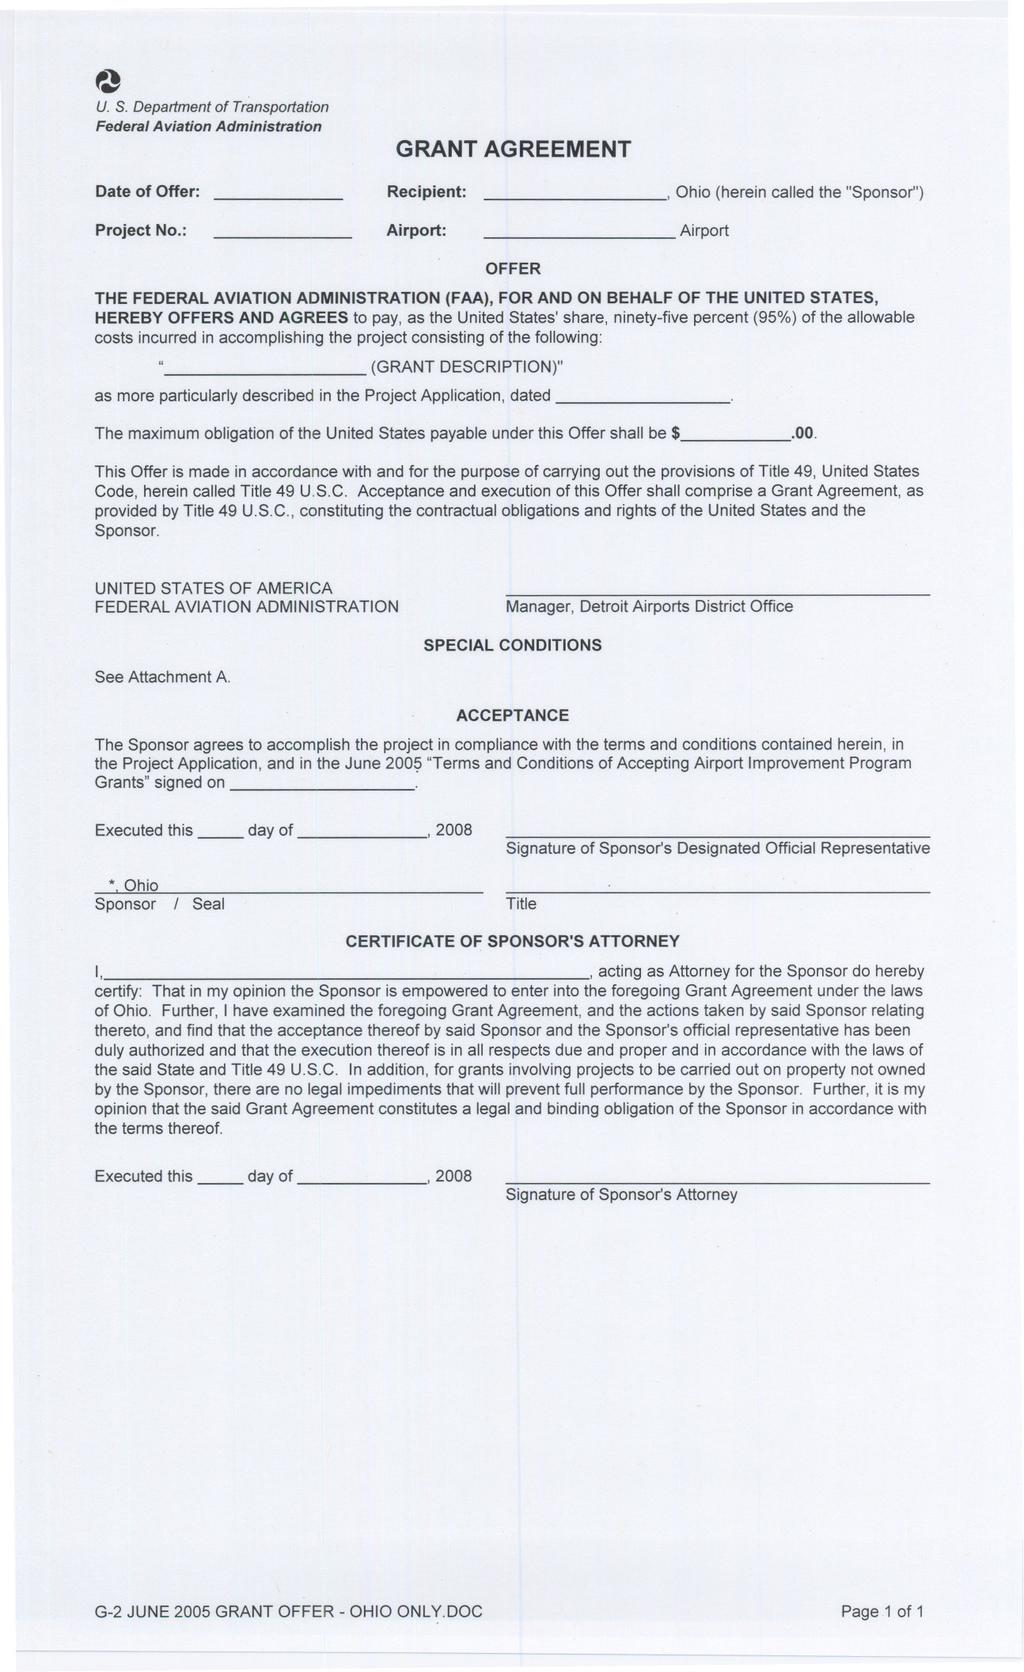 o u. S. Department of Transportation Federal Aviation Administration GRANT AGREEMENT Date of Offer: Recipient:, Ohio (herein called the "Sponsor") Project No.